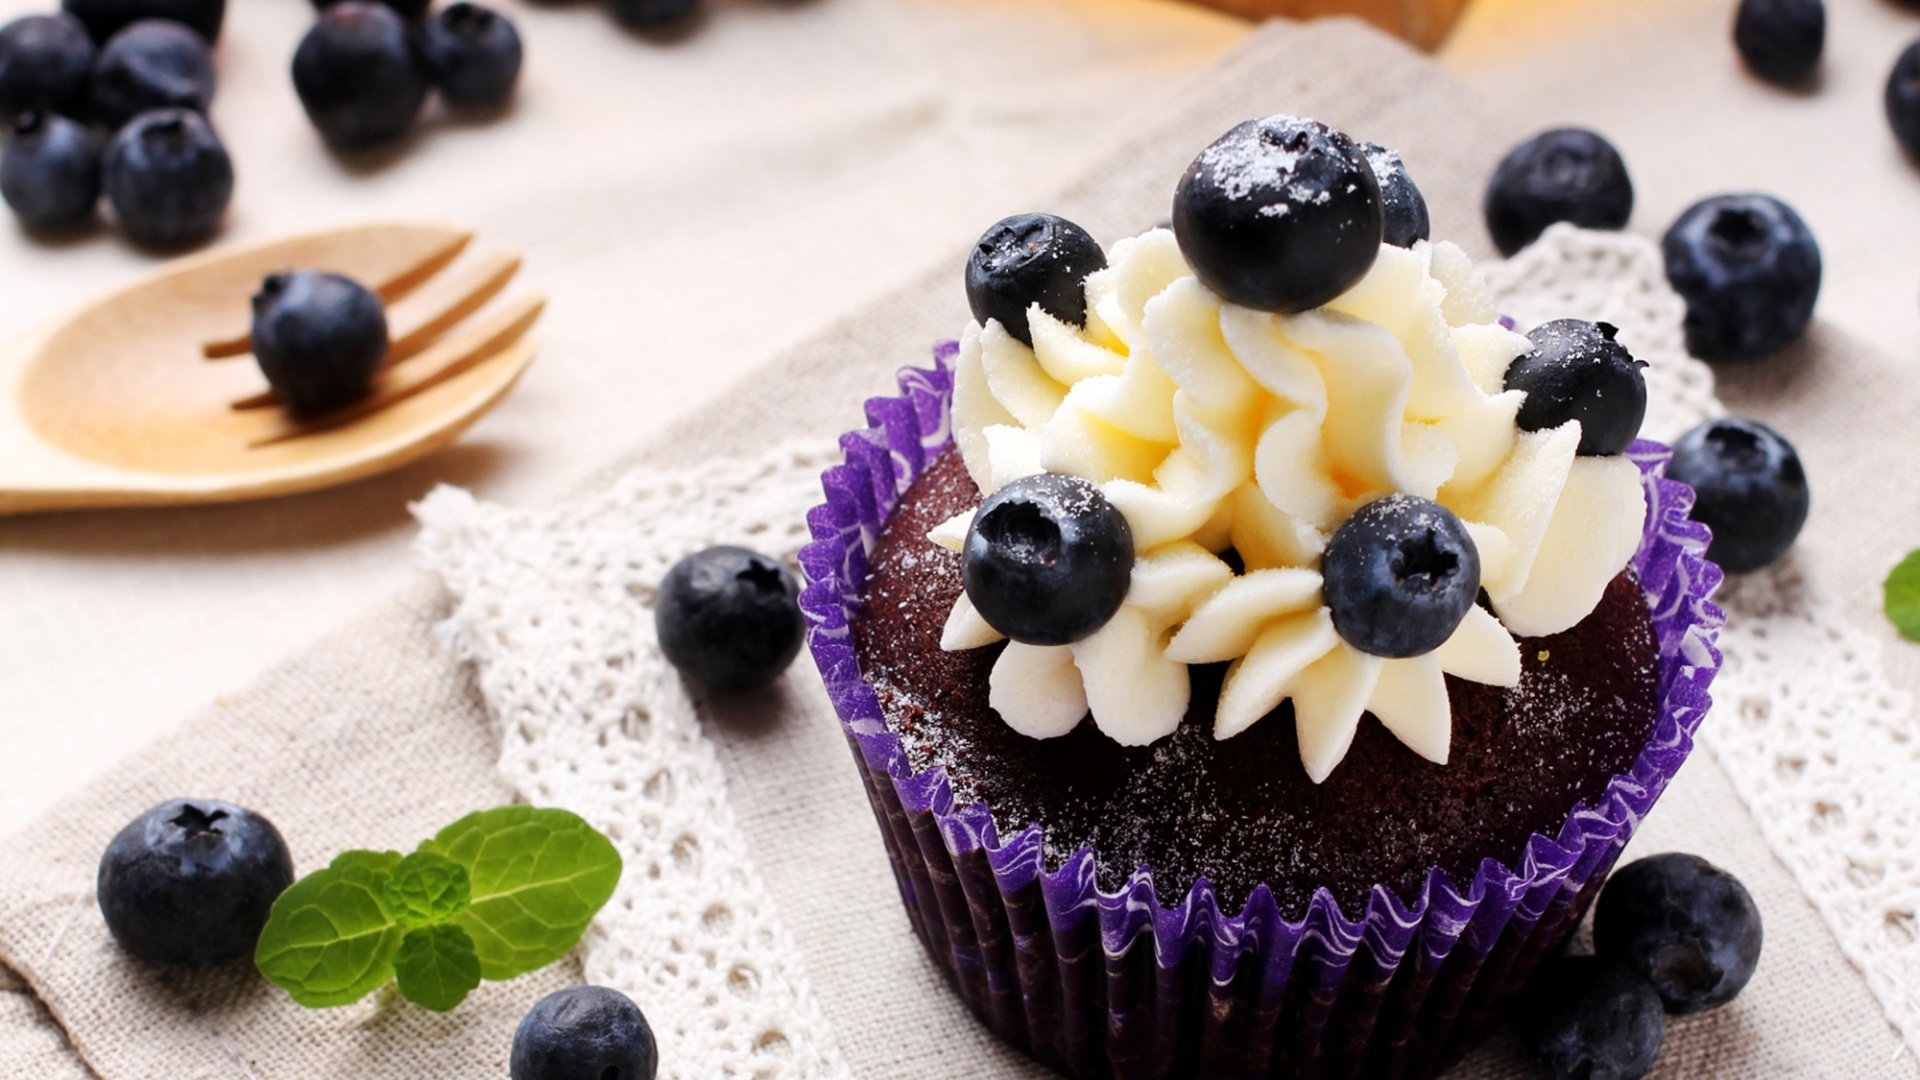 Muffin: Similar to cupcakes in size and cooking methods. 1920x1080 Full HD Background.